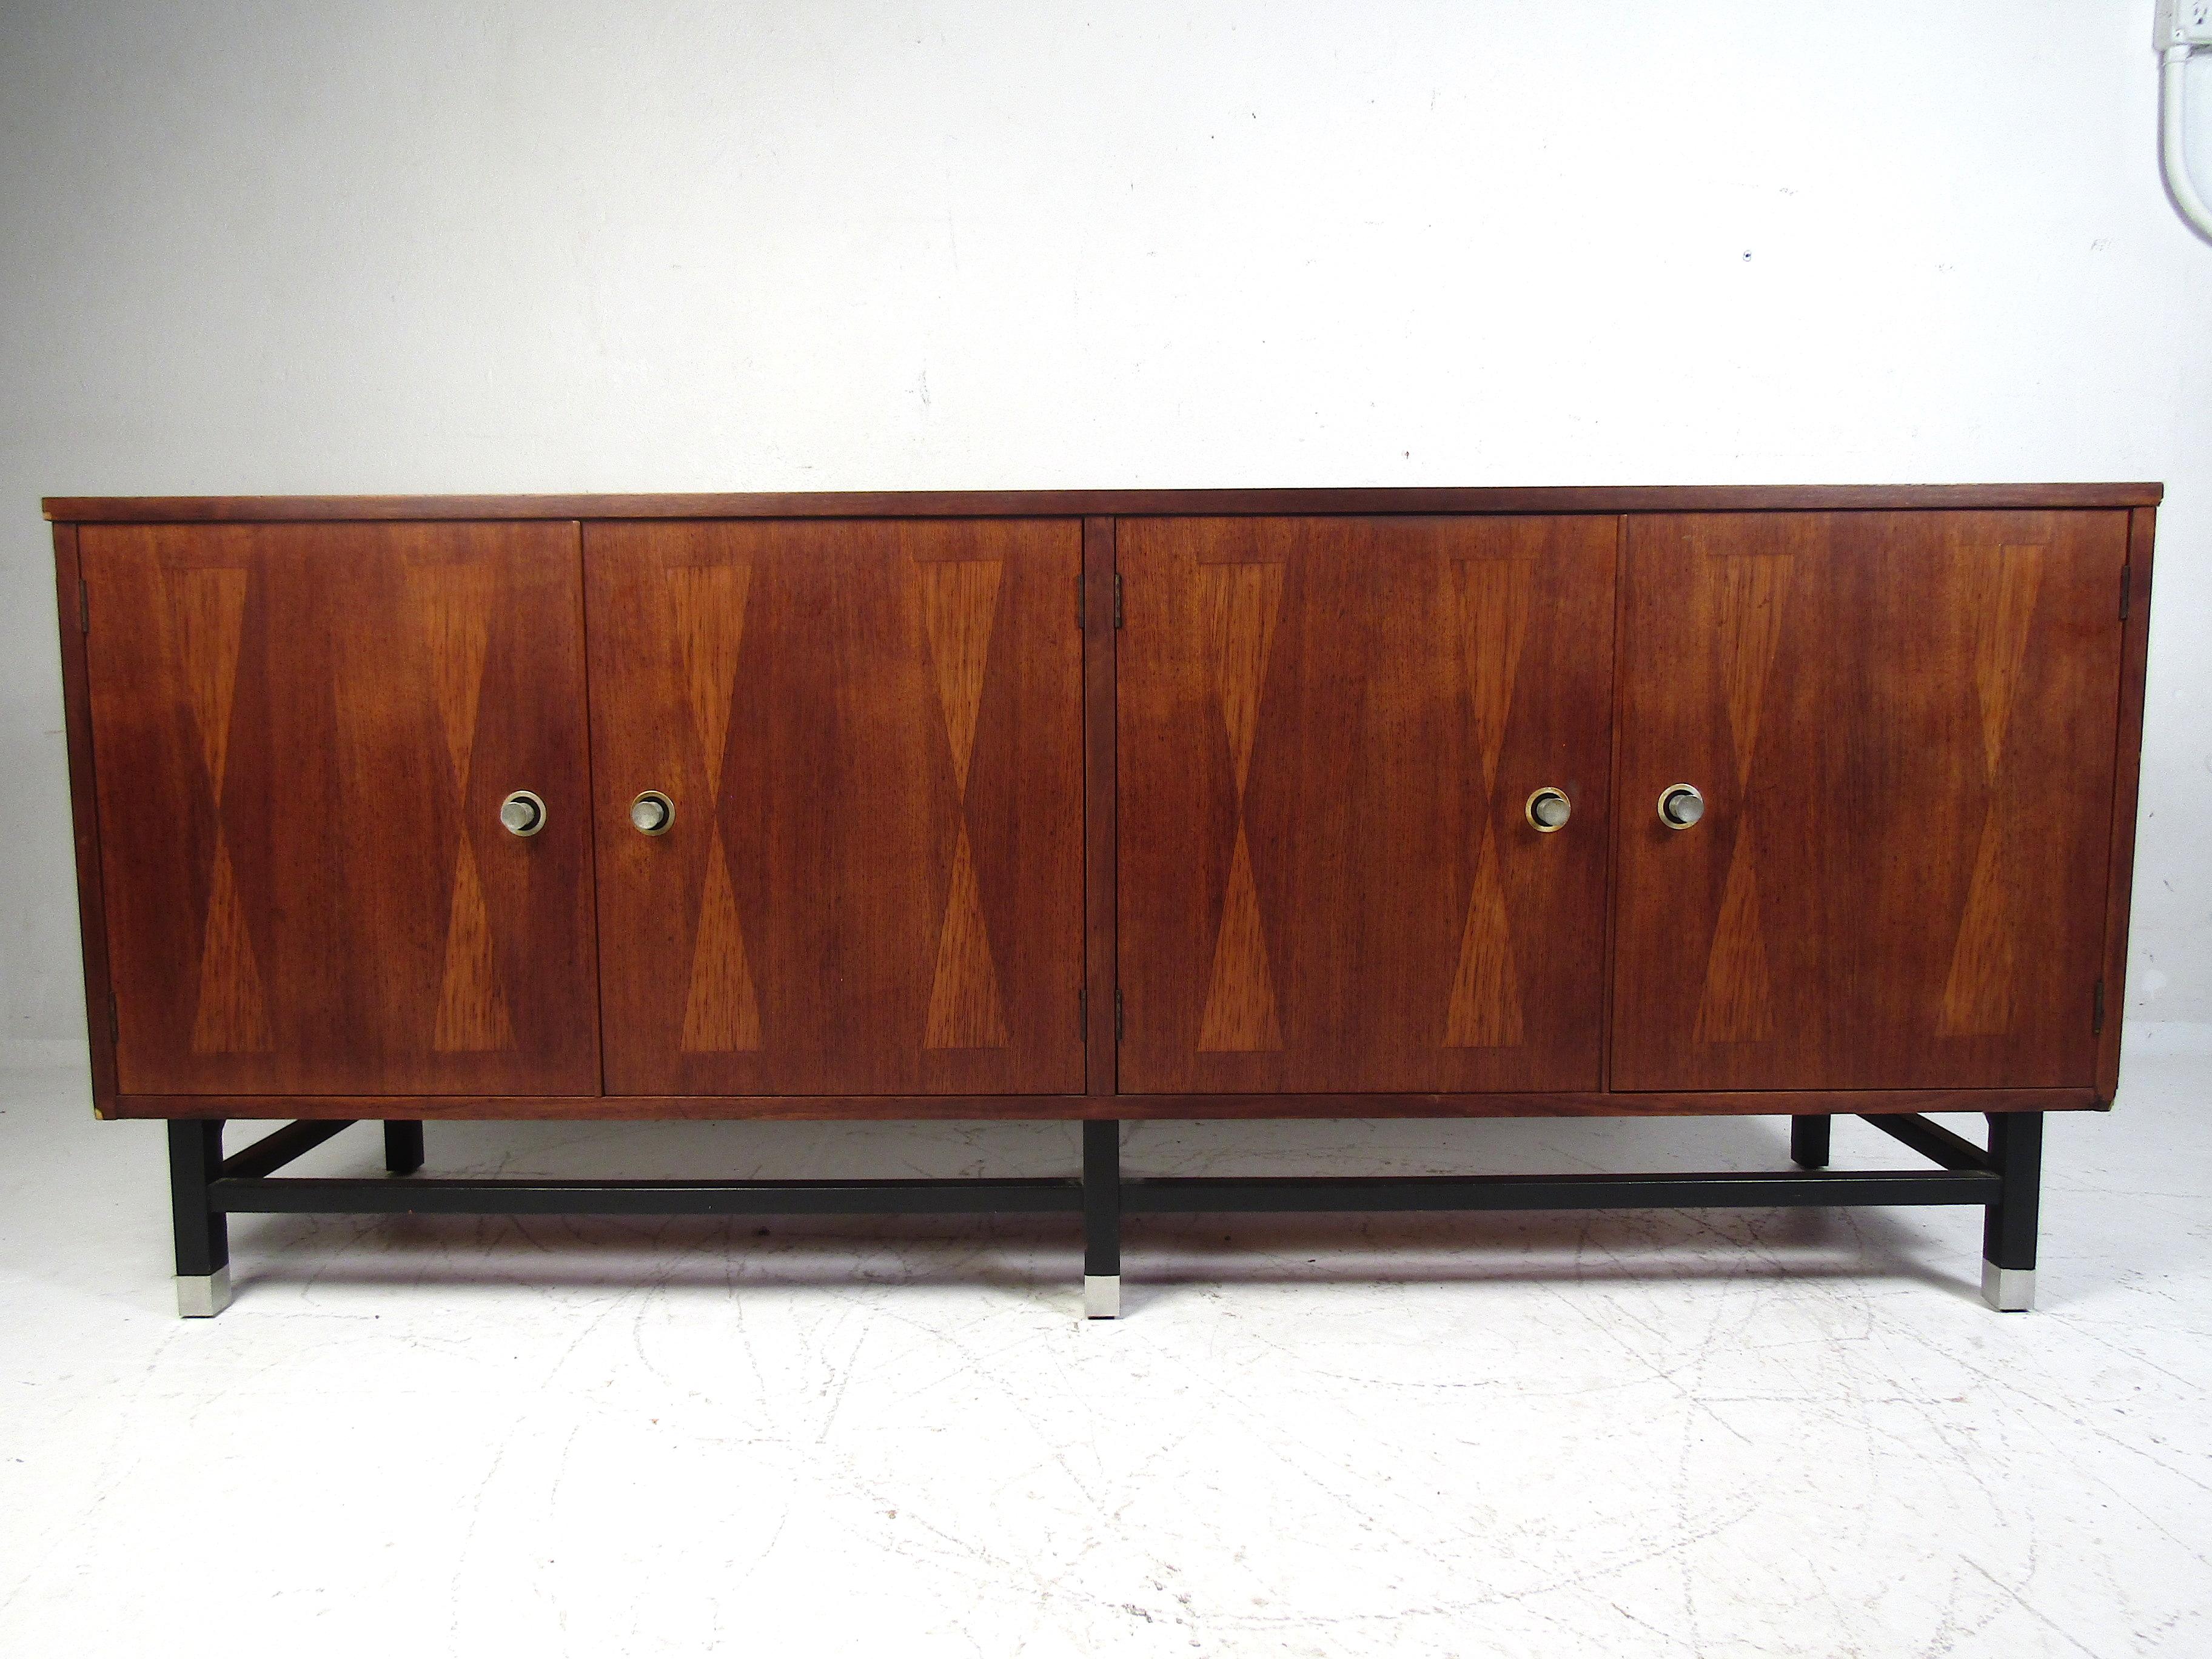 Stylish Mid-Century Modern dresser by Stanley. Cabinet with adjustable shelving on one side, with three dovetail-jointed drawers on the other side, the uppermost of which has a partitioned section. Walnut veneer exterior with bowtie inlays on the